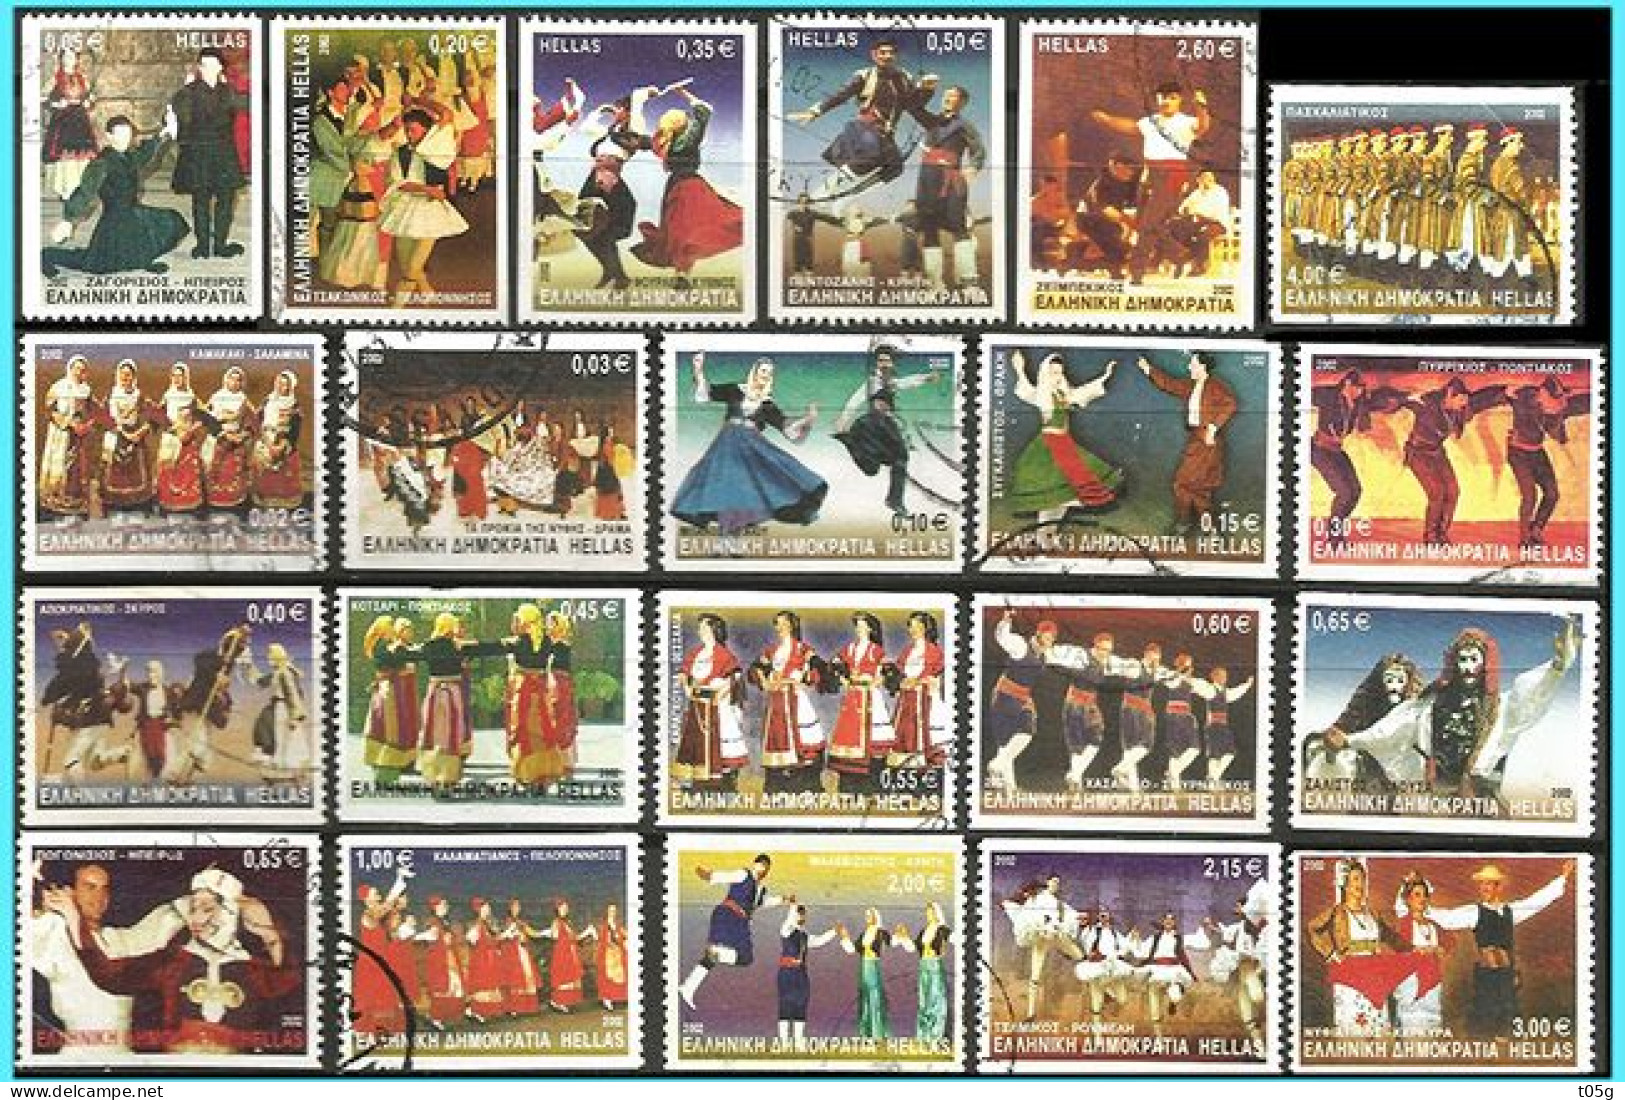 GREECE- GRECE - HELLAS 2002: Greek  dances Compl. Set Used  with Perforate Horizontally Imperforate - Usati